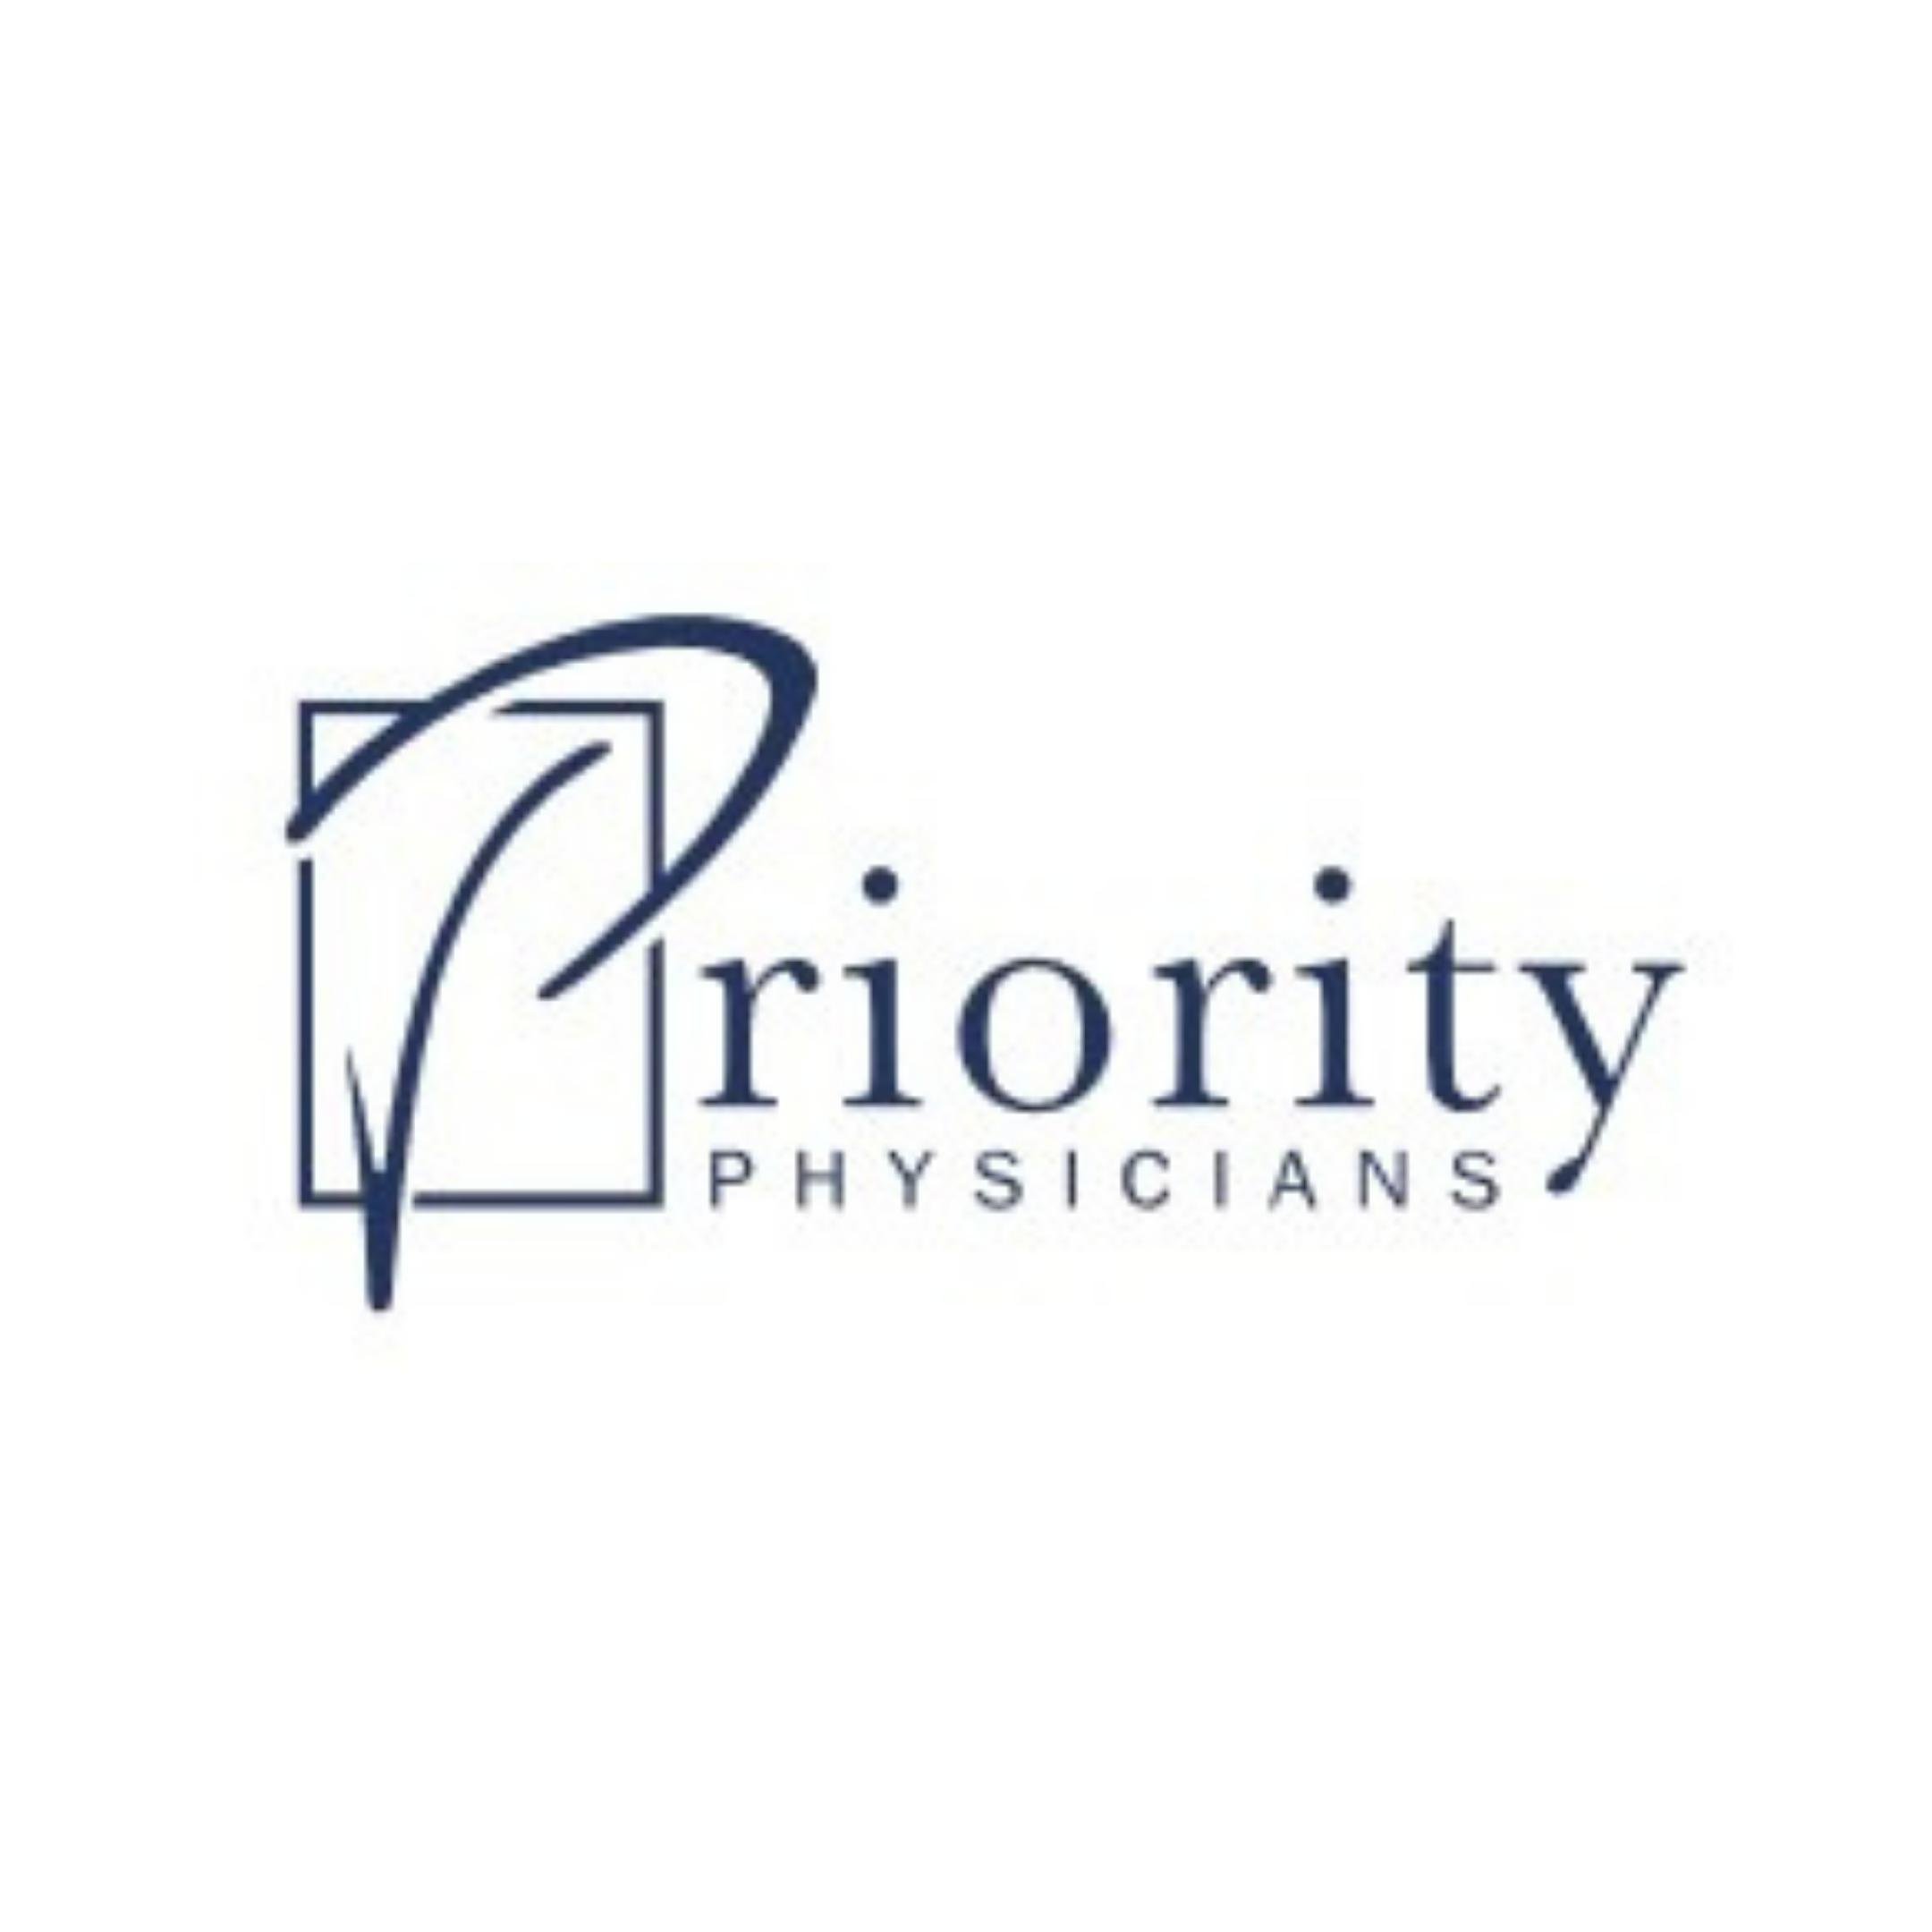 Sponsor Images - Priority Physicians.jpg